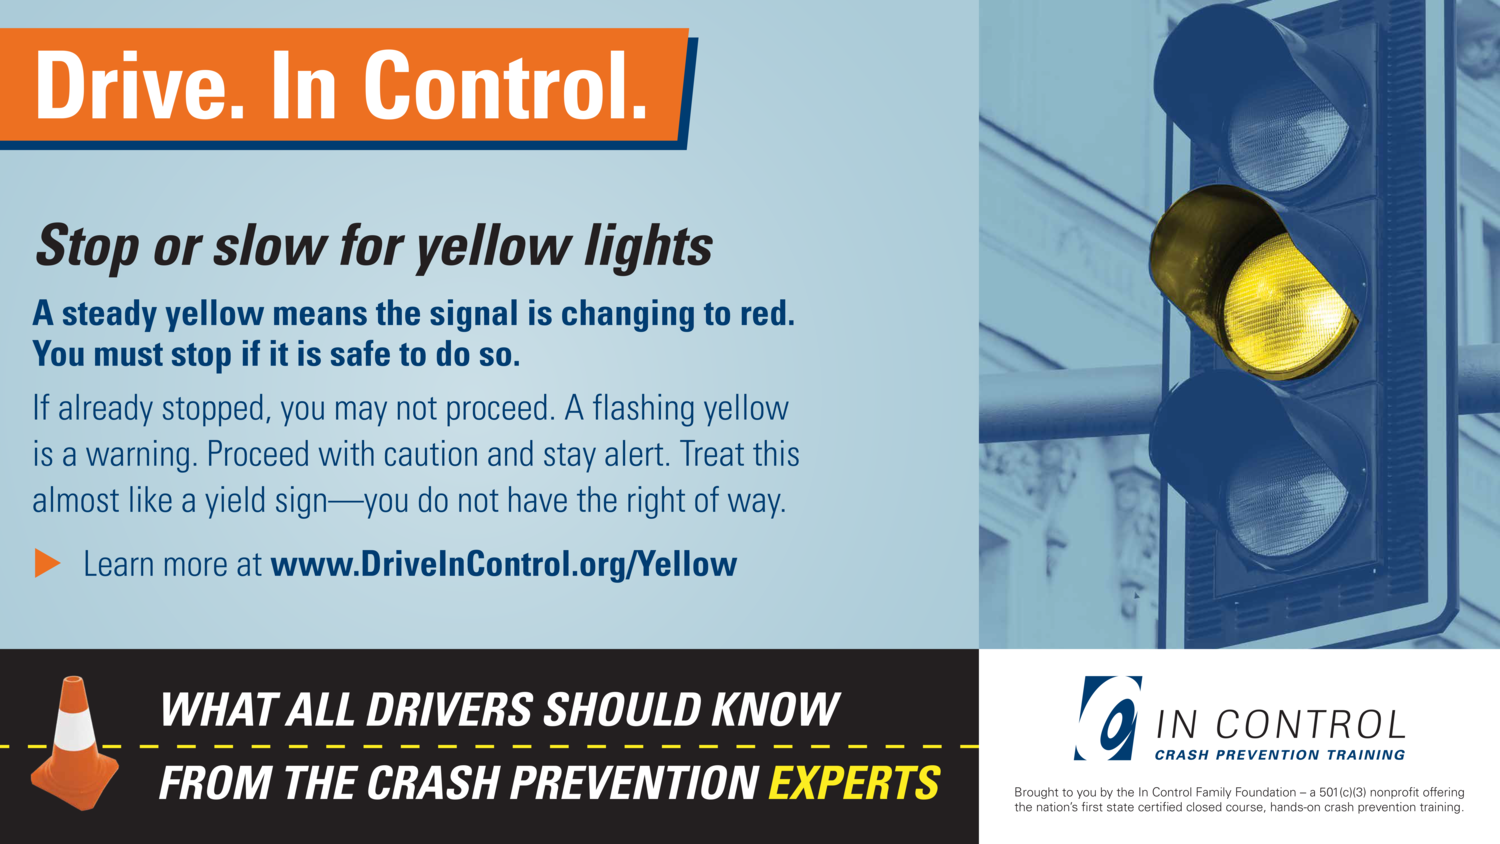 Why do people stop at yellow lights?